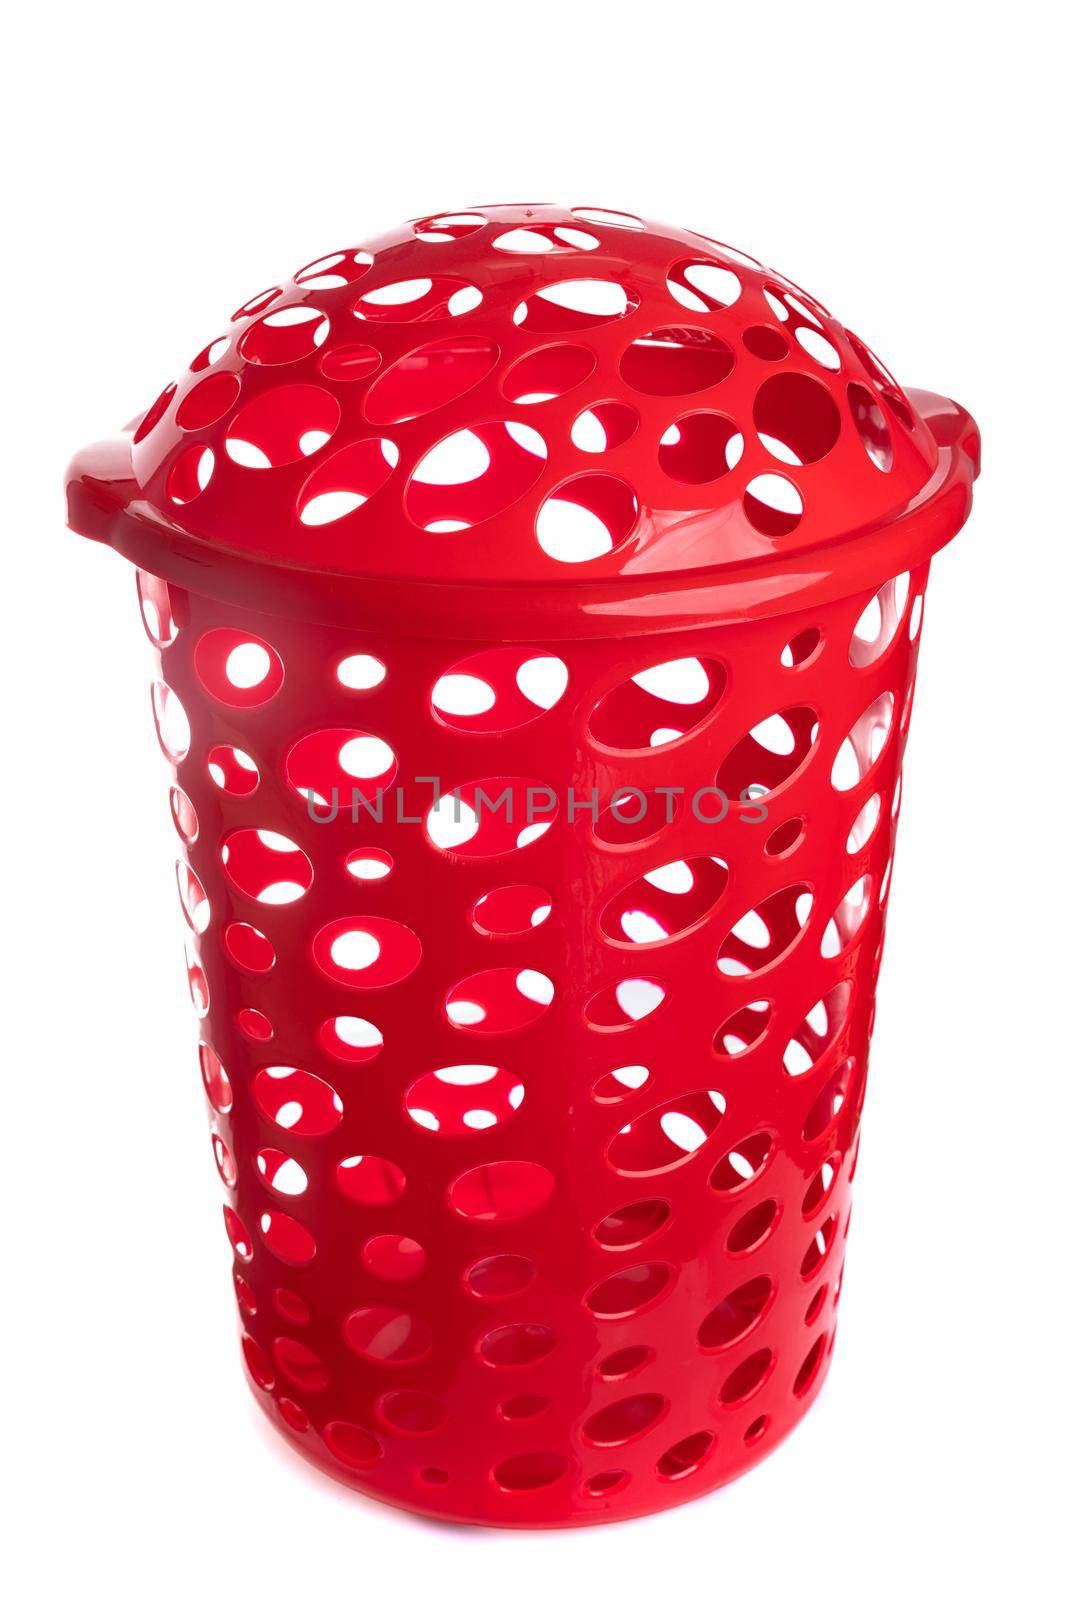 red plastic laundry tub on white background by TRMK